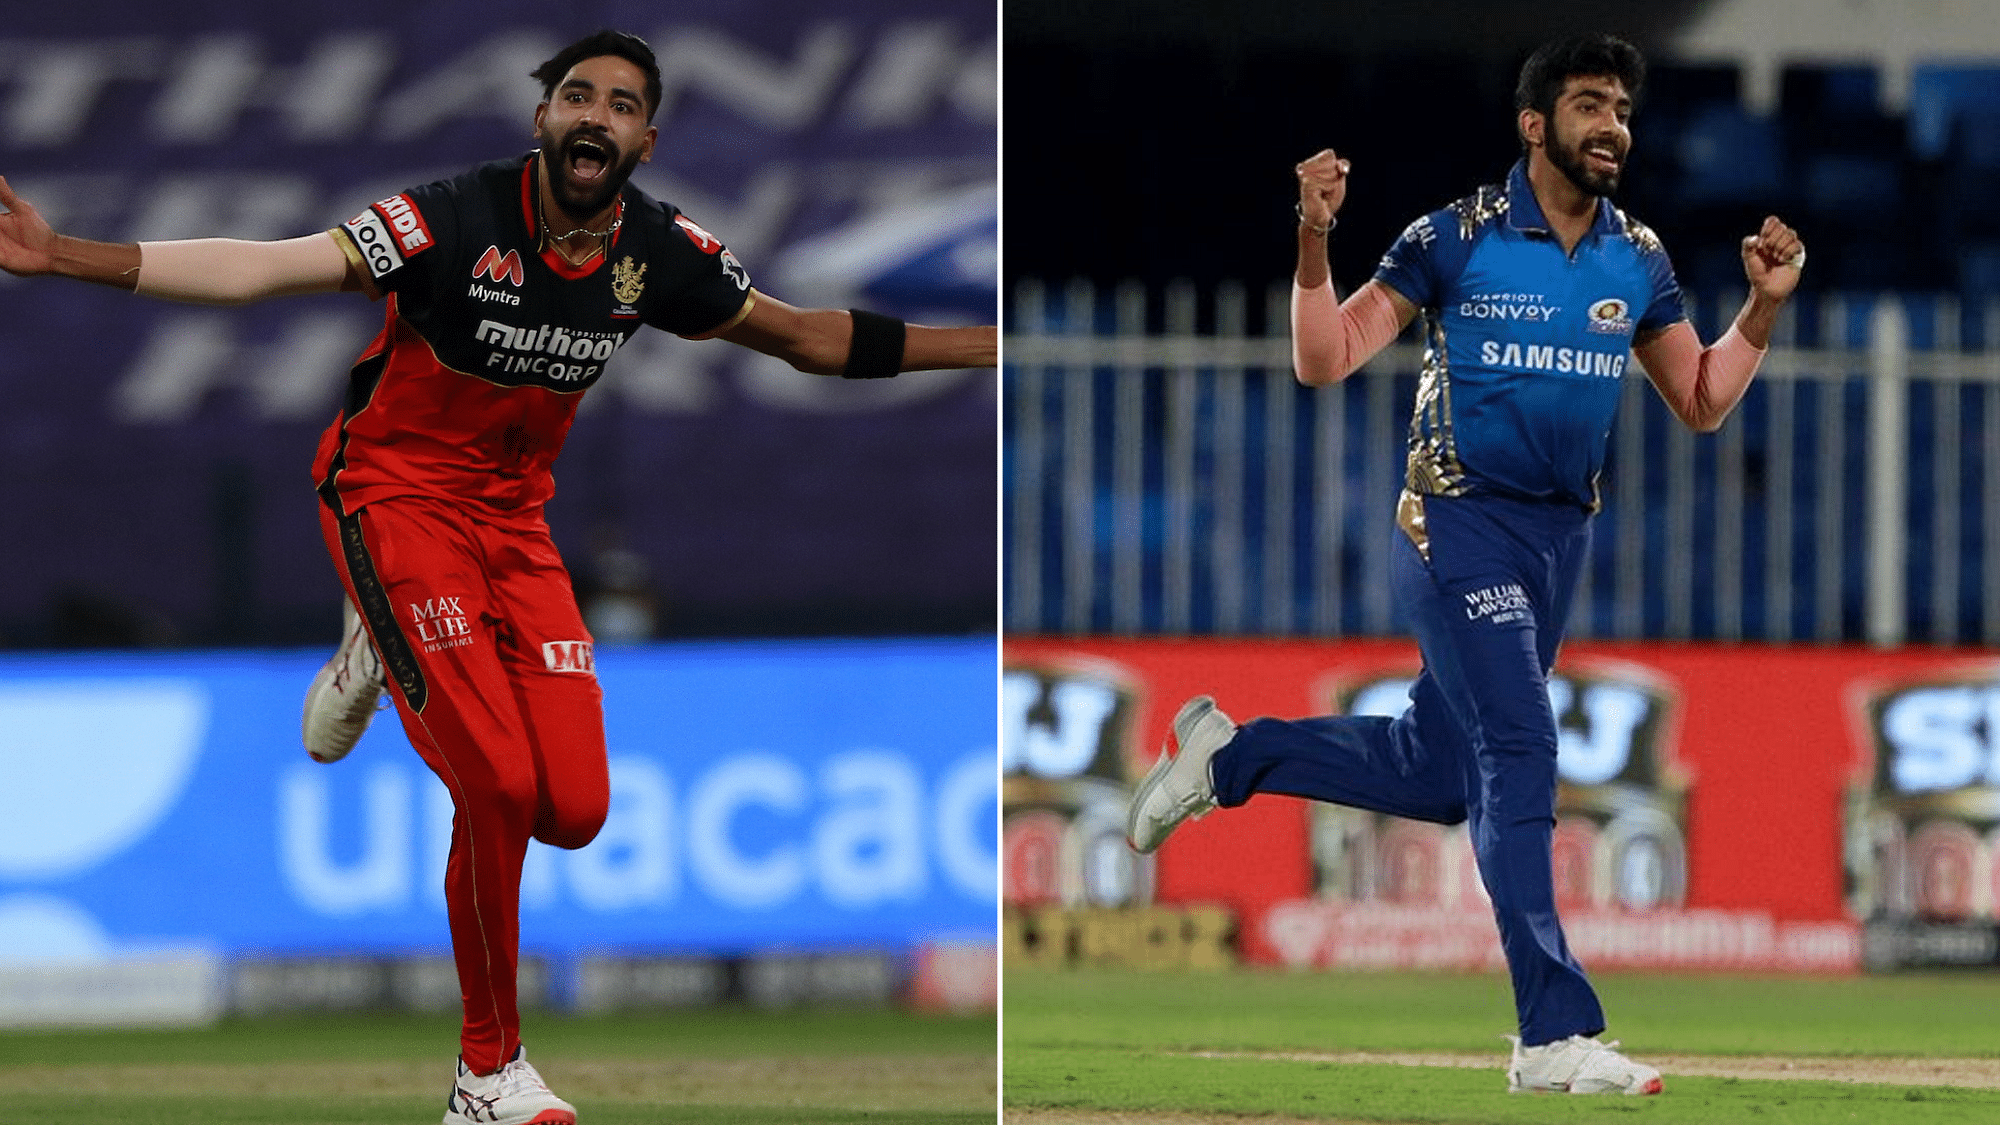 Mohammad Siraj and Jasprit Bumrah generally don’t get the new ball, but captains went their way after seeing the initial swing